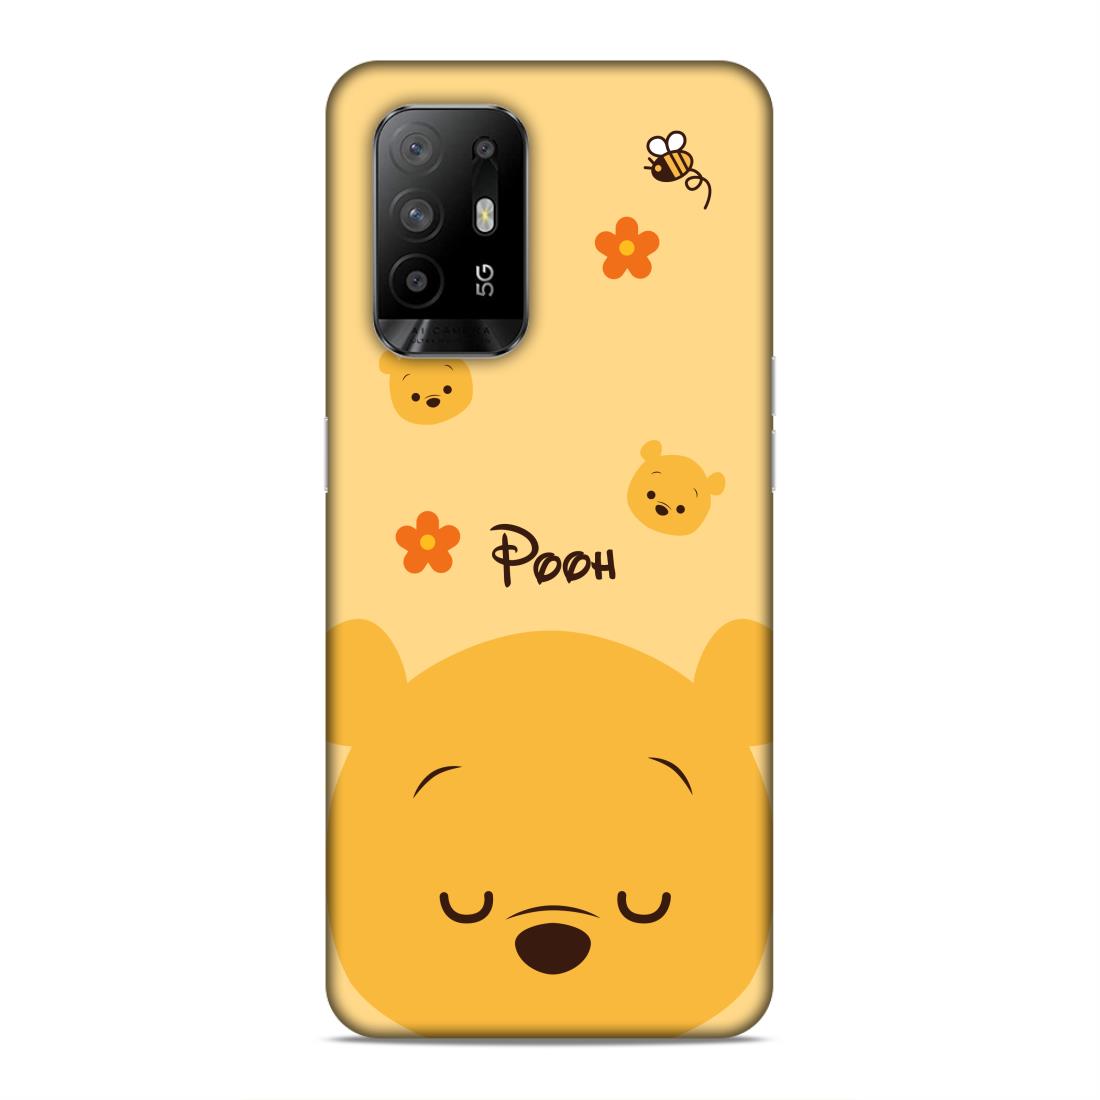 Pooh Cartton Hard Back Case For Oppo F19 Pro Plus